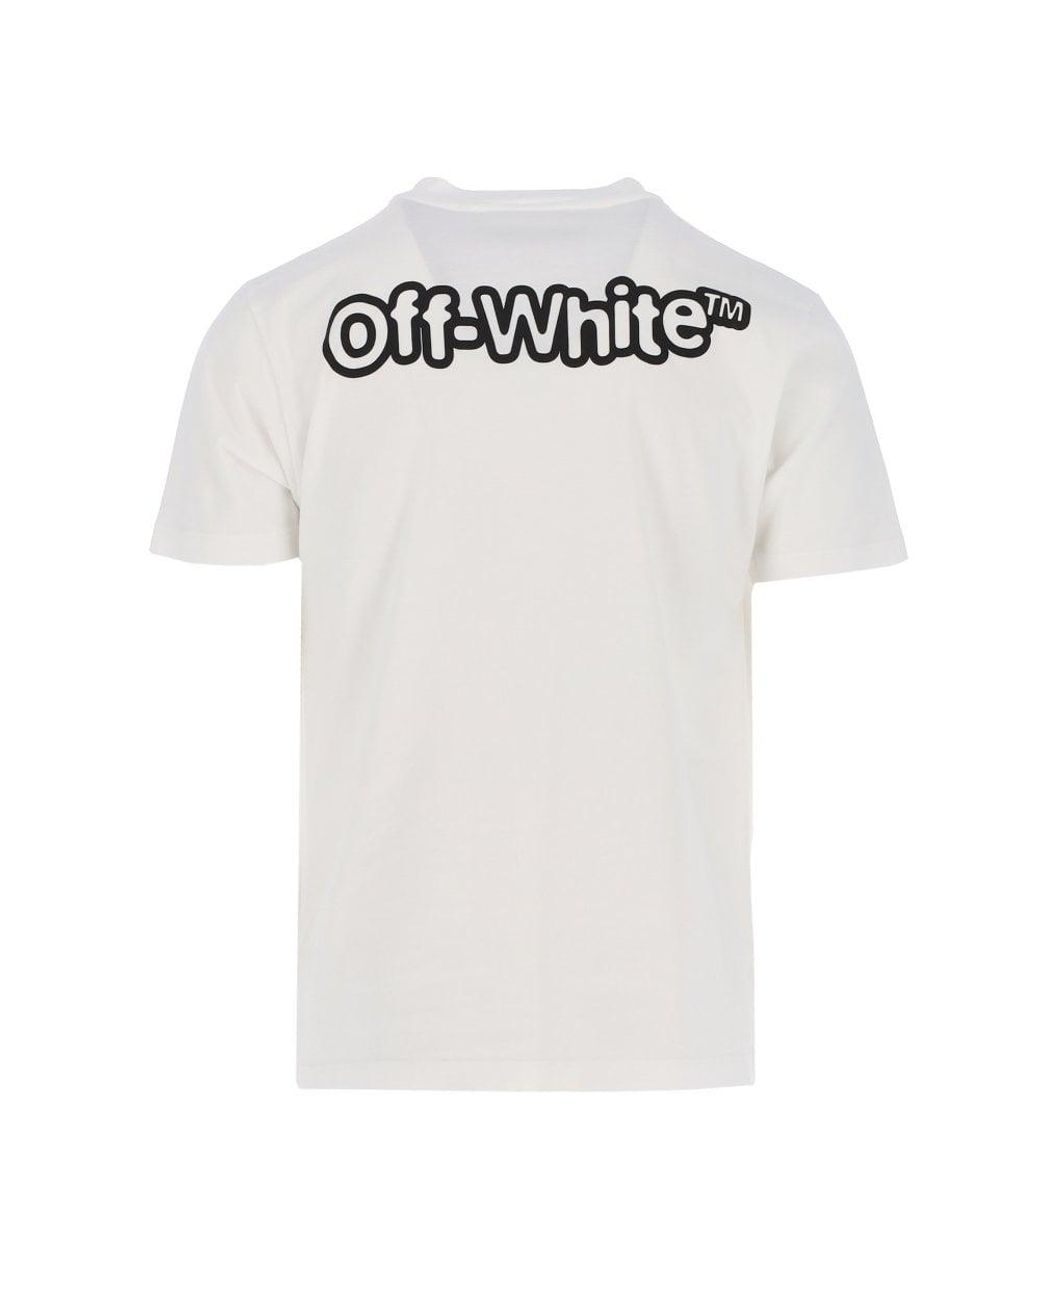 Off White Font » Fonts Max